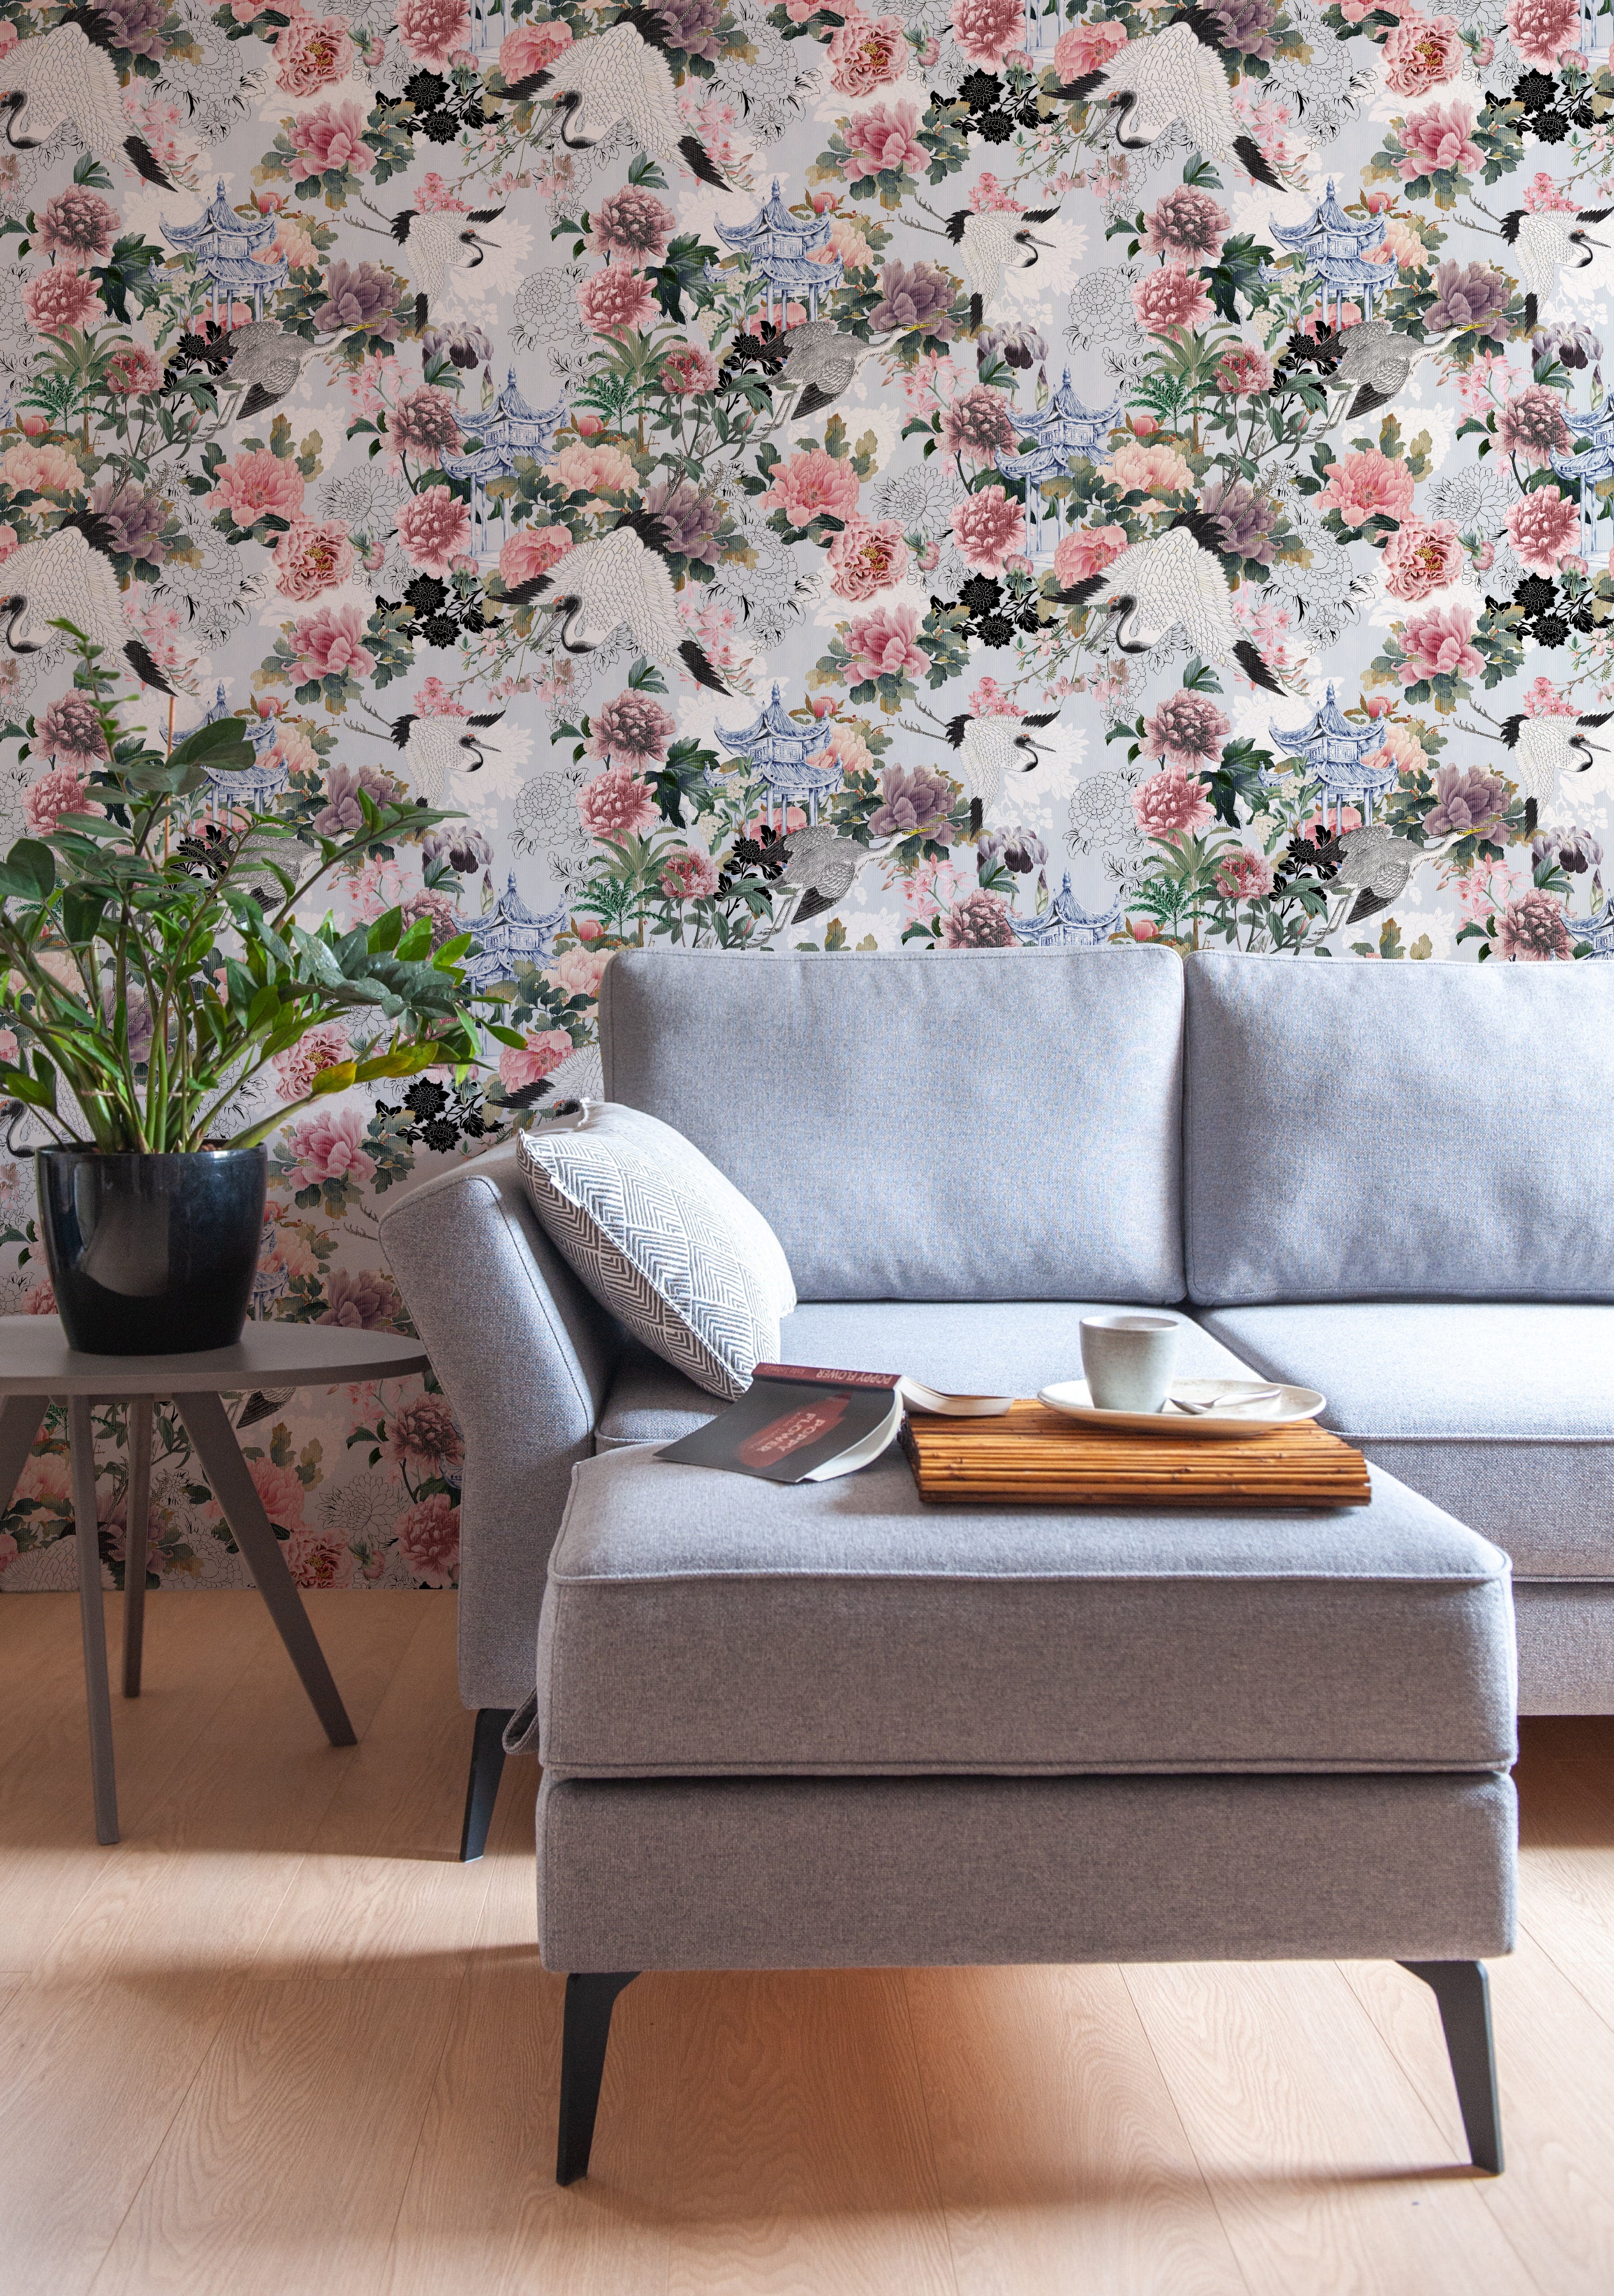 A stylish living room enhanced by the Kyoto Dreams Wallpaper, creating an elegant focal wall behind a contemporary grey sofa. The wallpaper's design, depicting large peonies and cranes amidst traditional Japanese architecture, infuses the space with a sense of luxury and cultural beauty